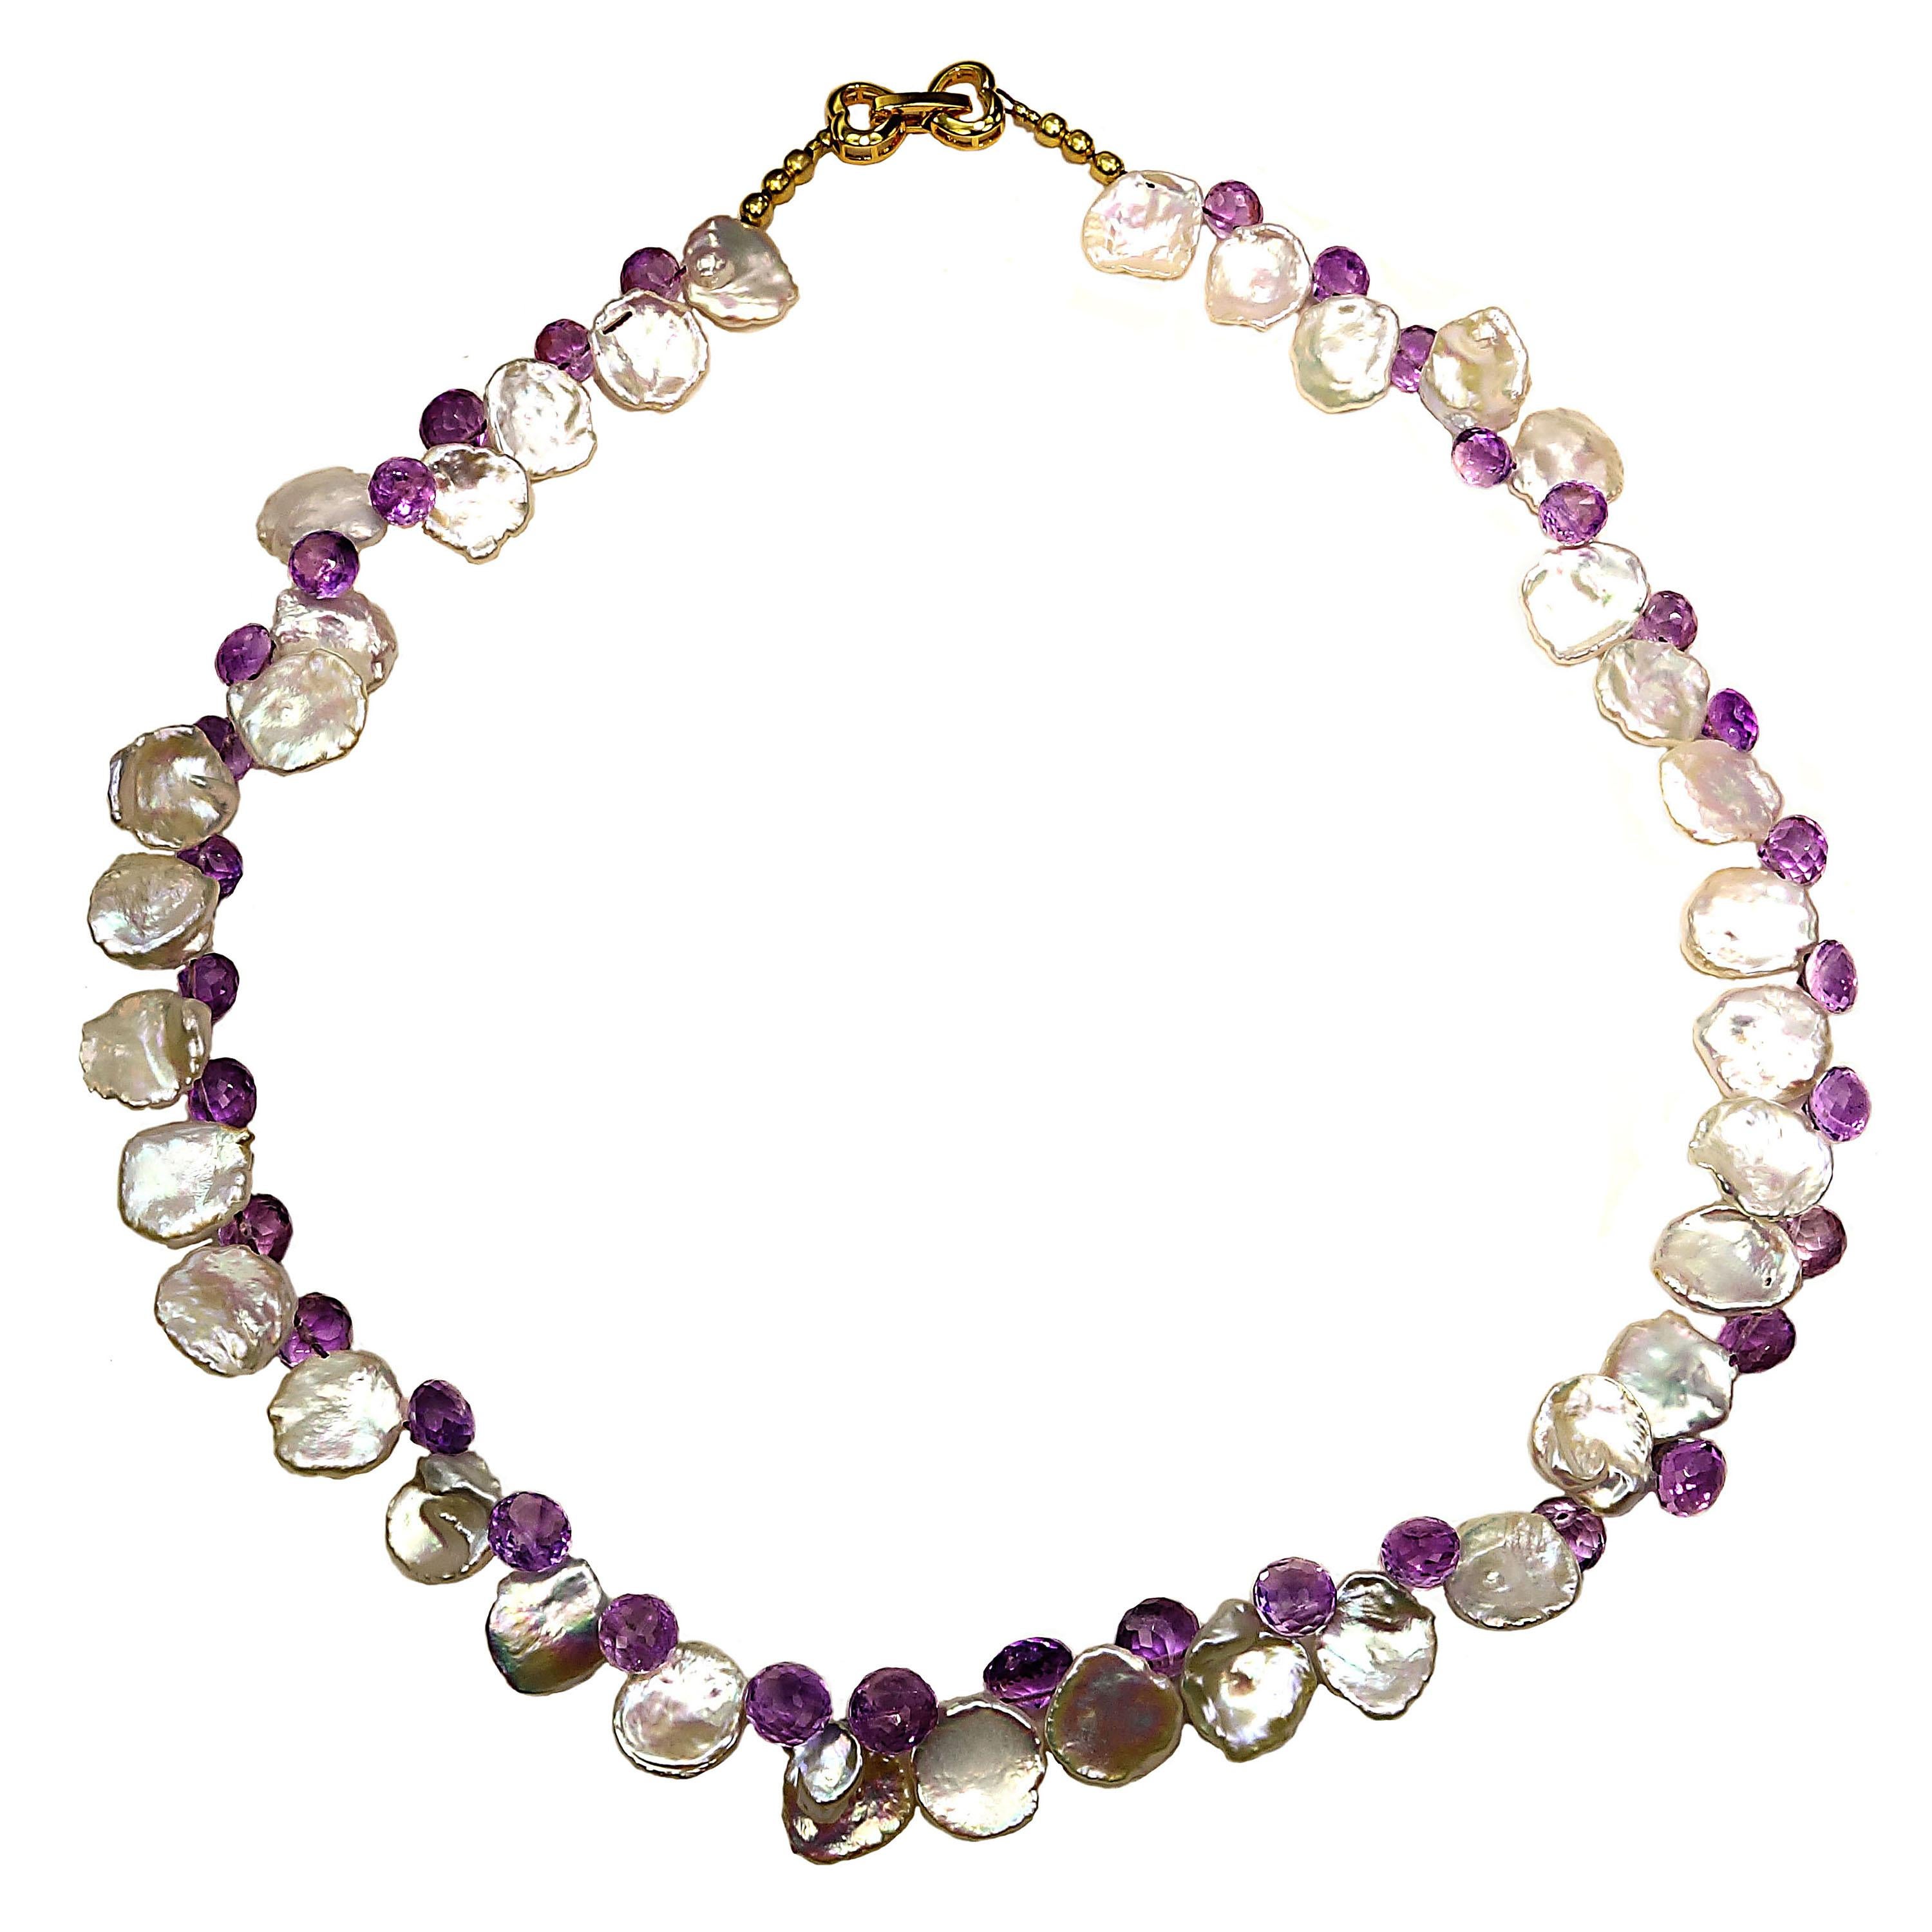 Gemjunky Iridescent White Keshi Pearl and Amethyst Briolette Necklace  7